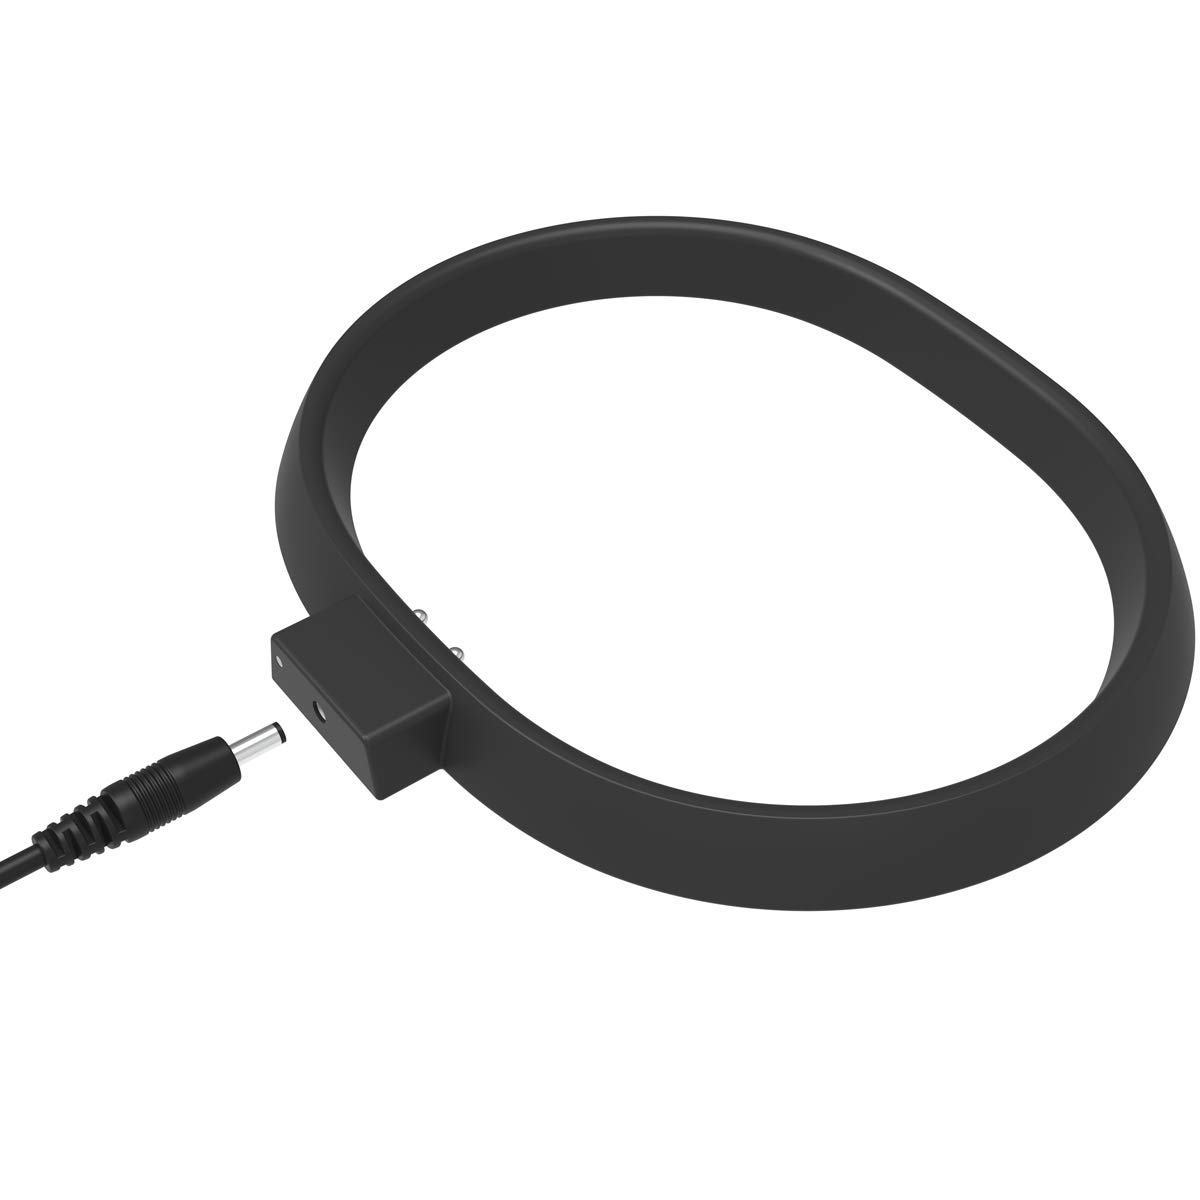 Soarking Charging Base for Sonos Move with 45W Adapter and 6.6 Feet Cable(Black)